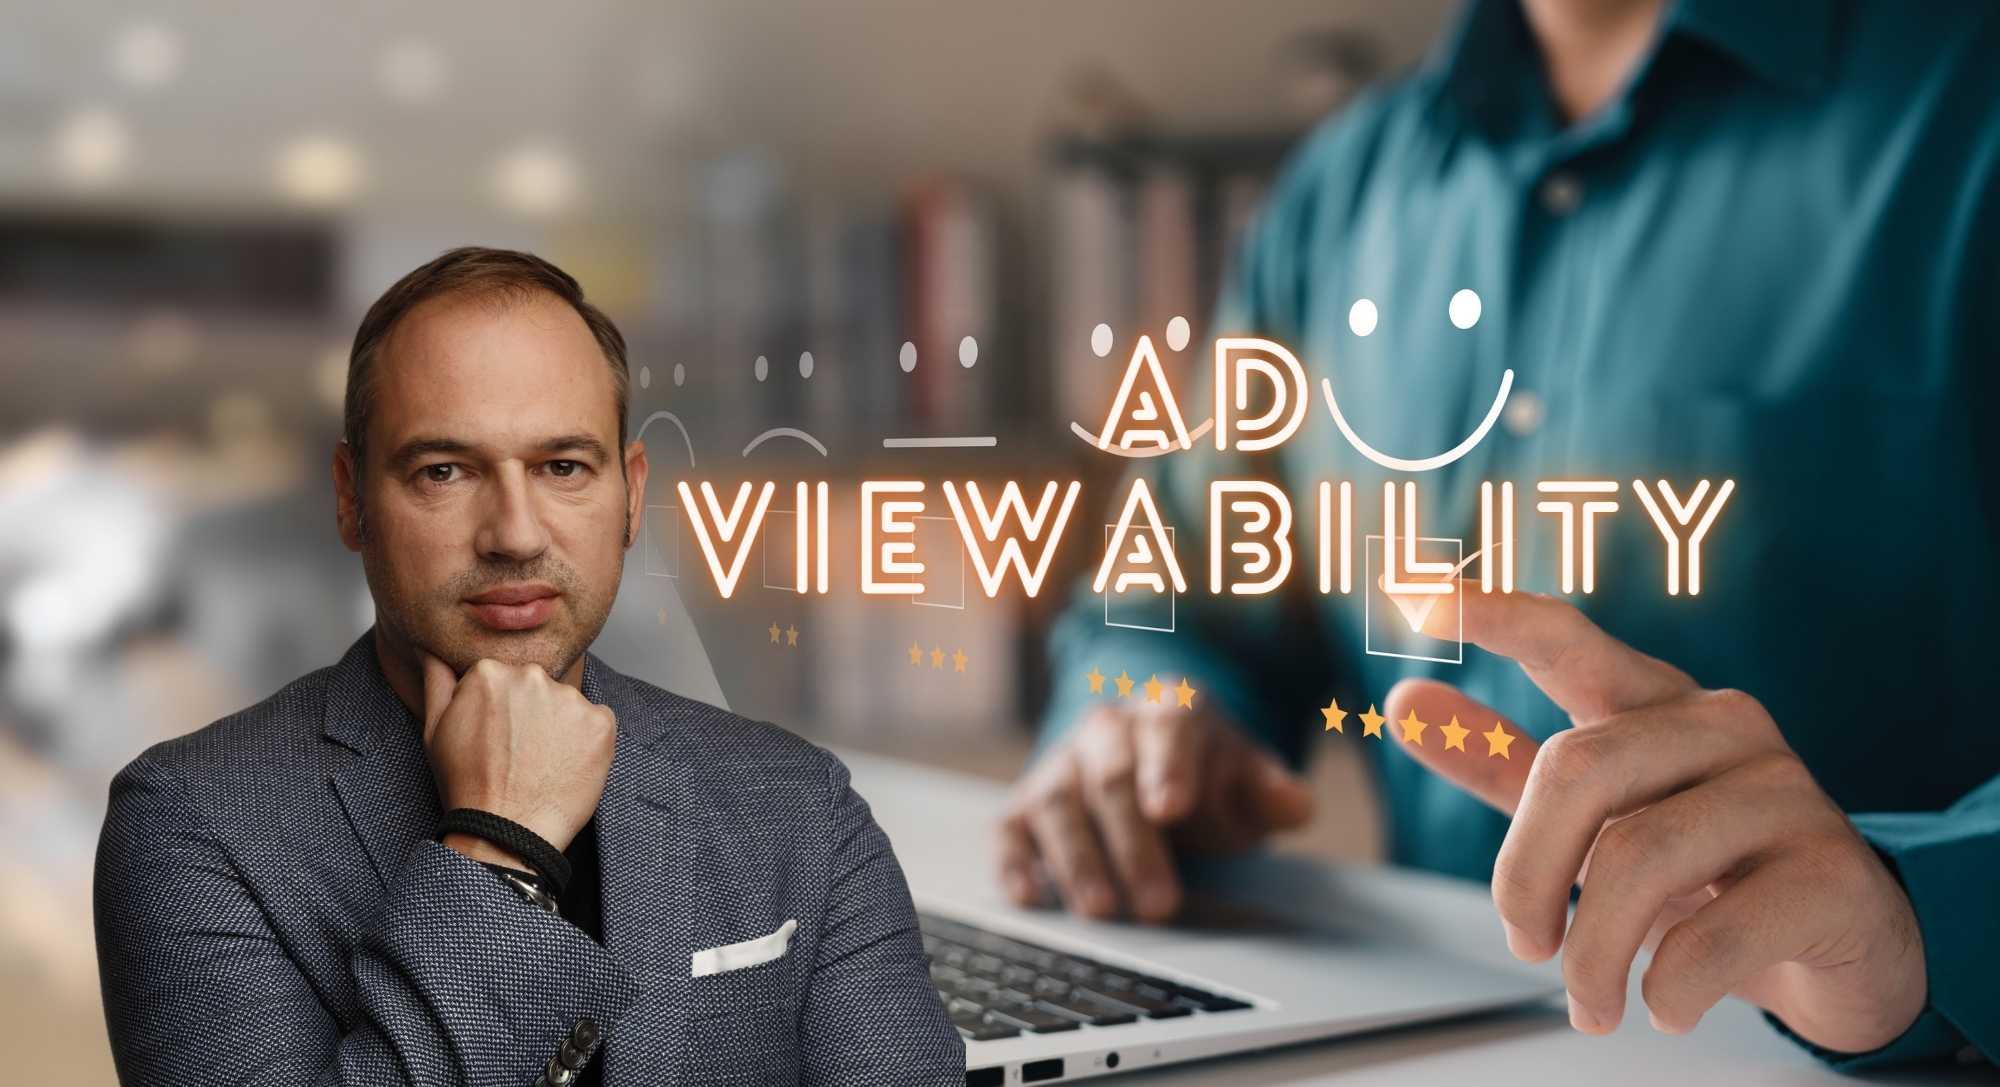 Ad Viewability: Is the Current Model Broken?